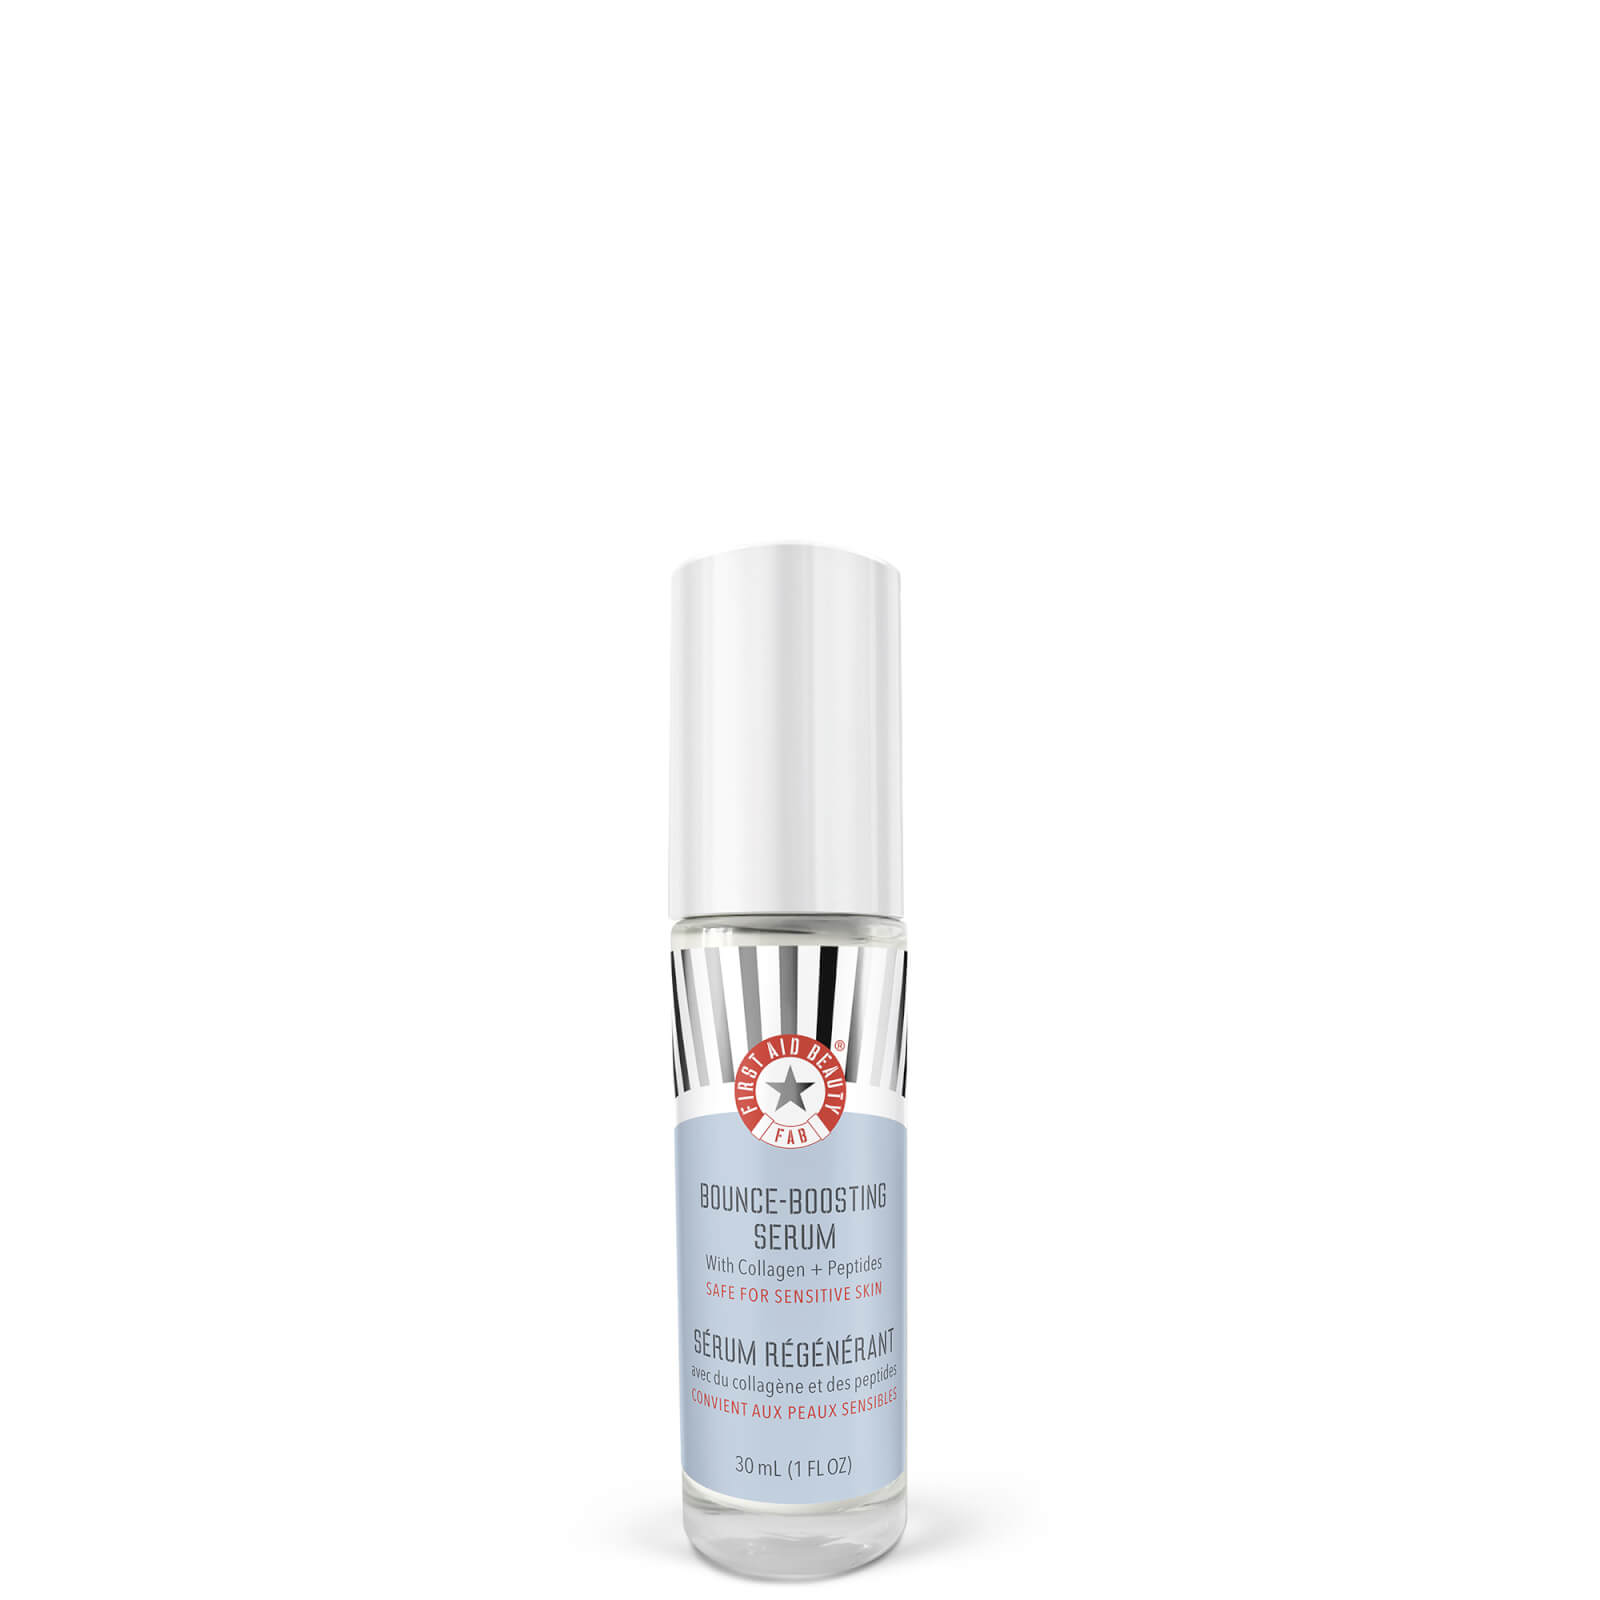 Image of First Aid Beauty Bounce-Boosting Serum with Collagen + Peptides 30ml